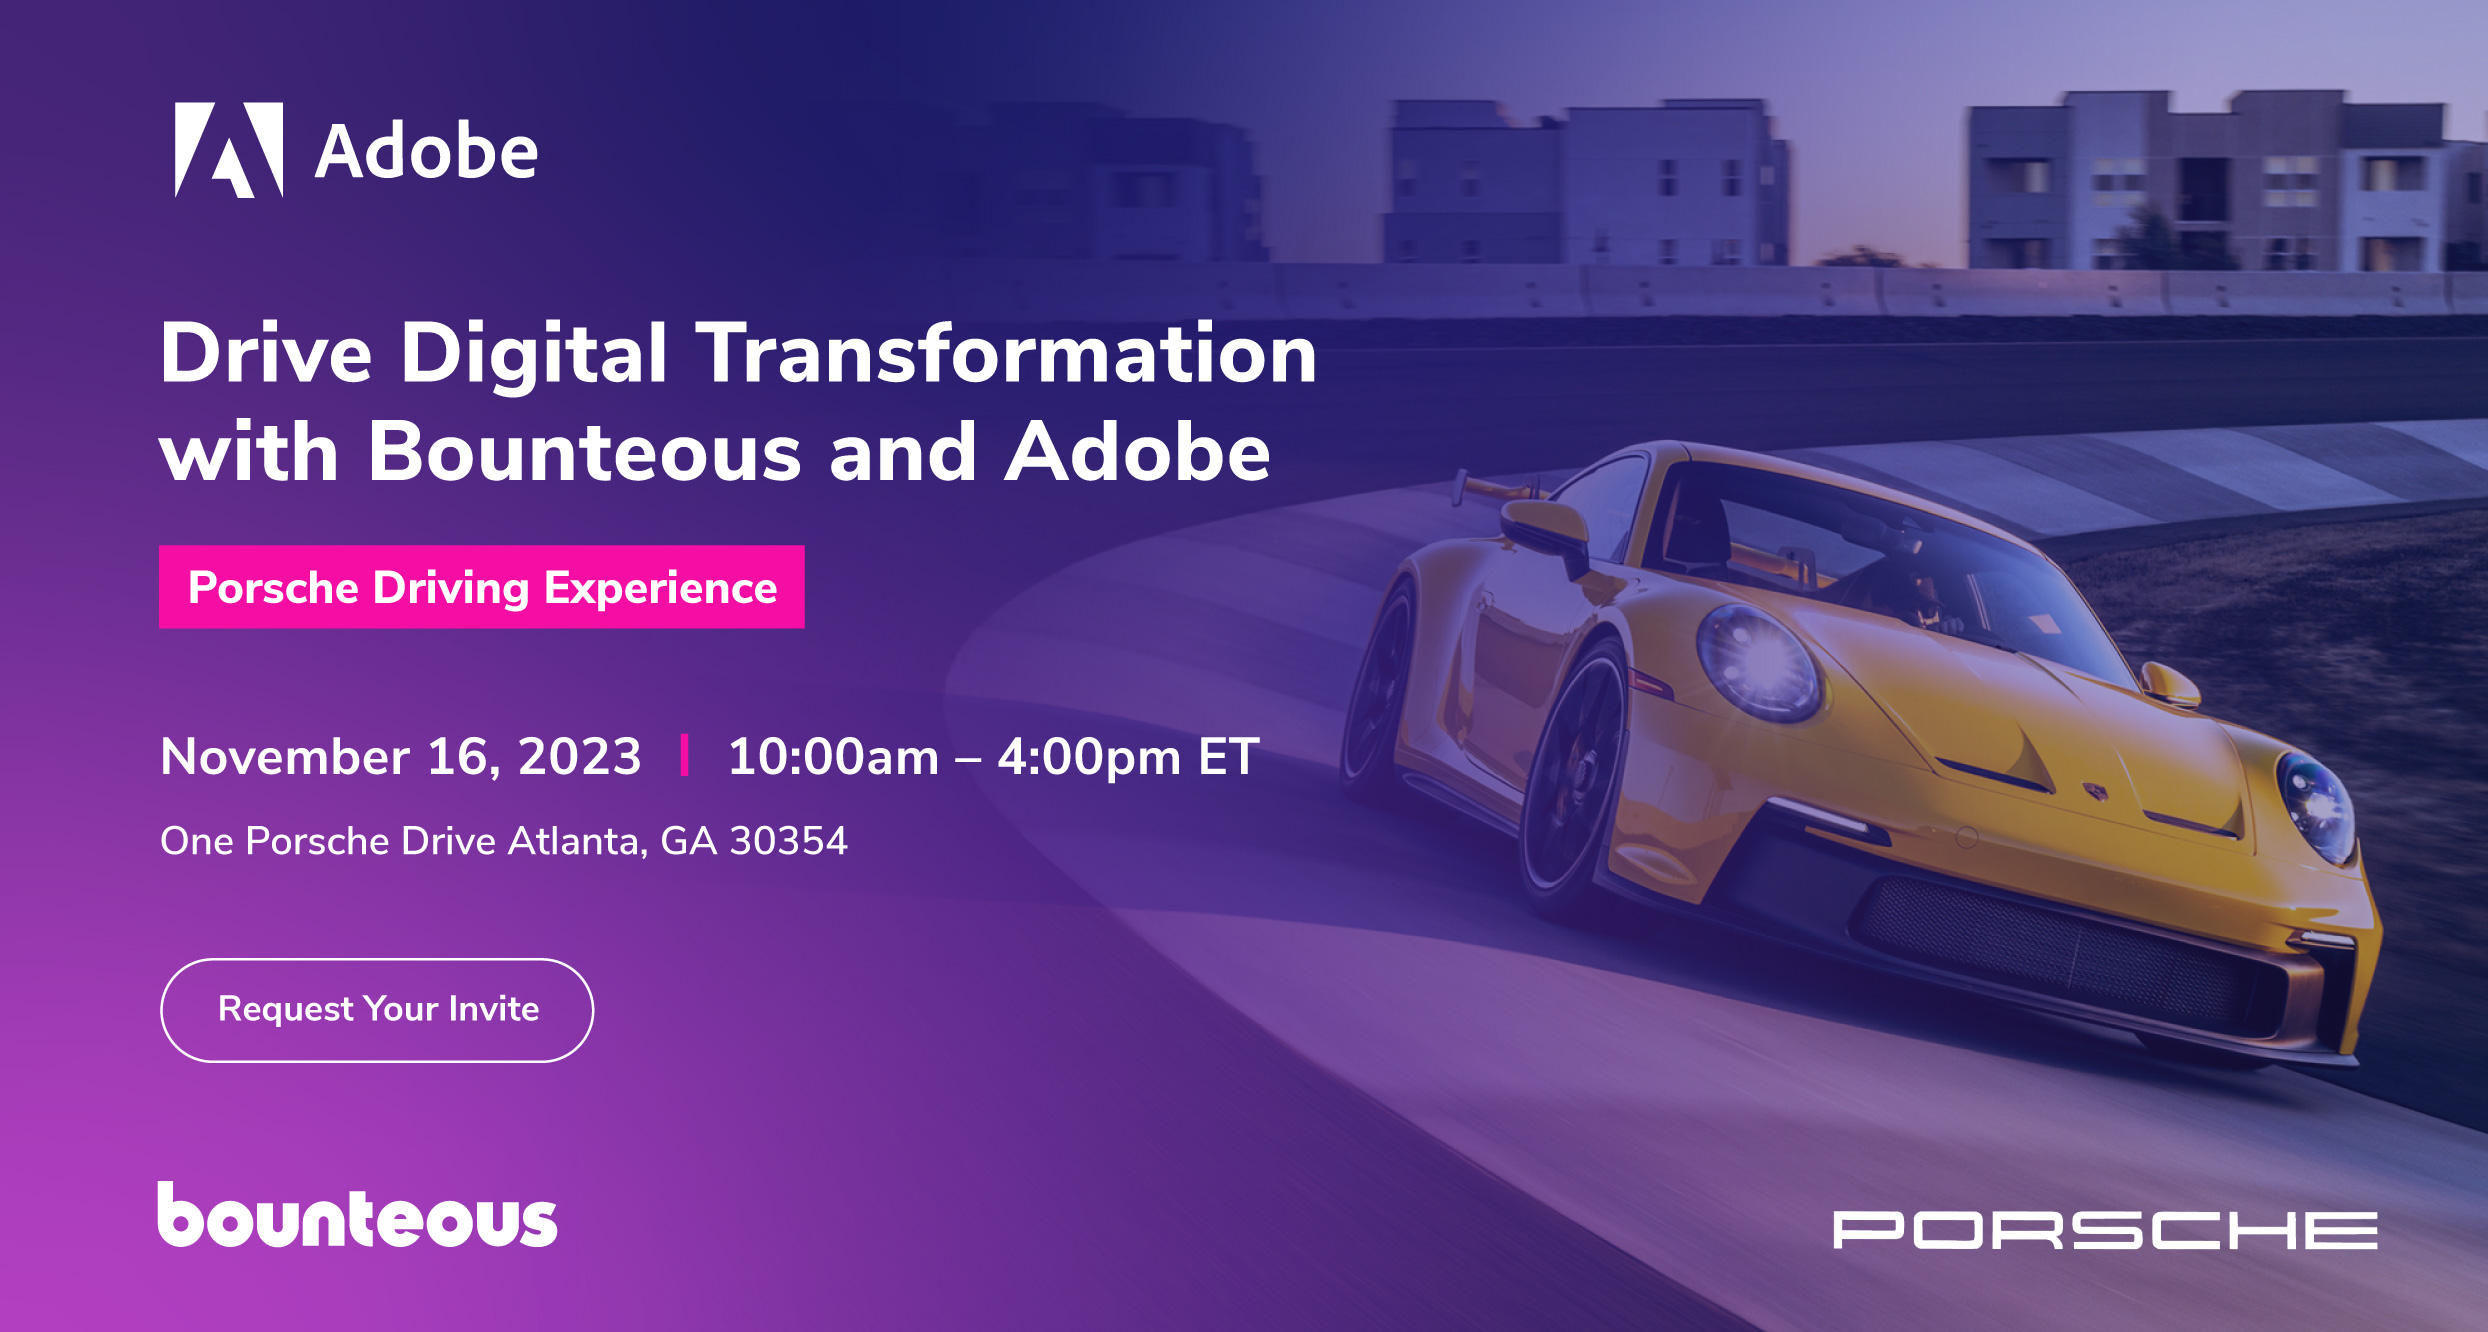 Drive Digital Transformation with Bounteous and Adobe